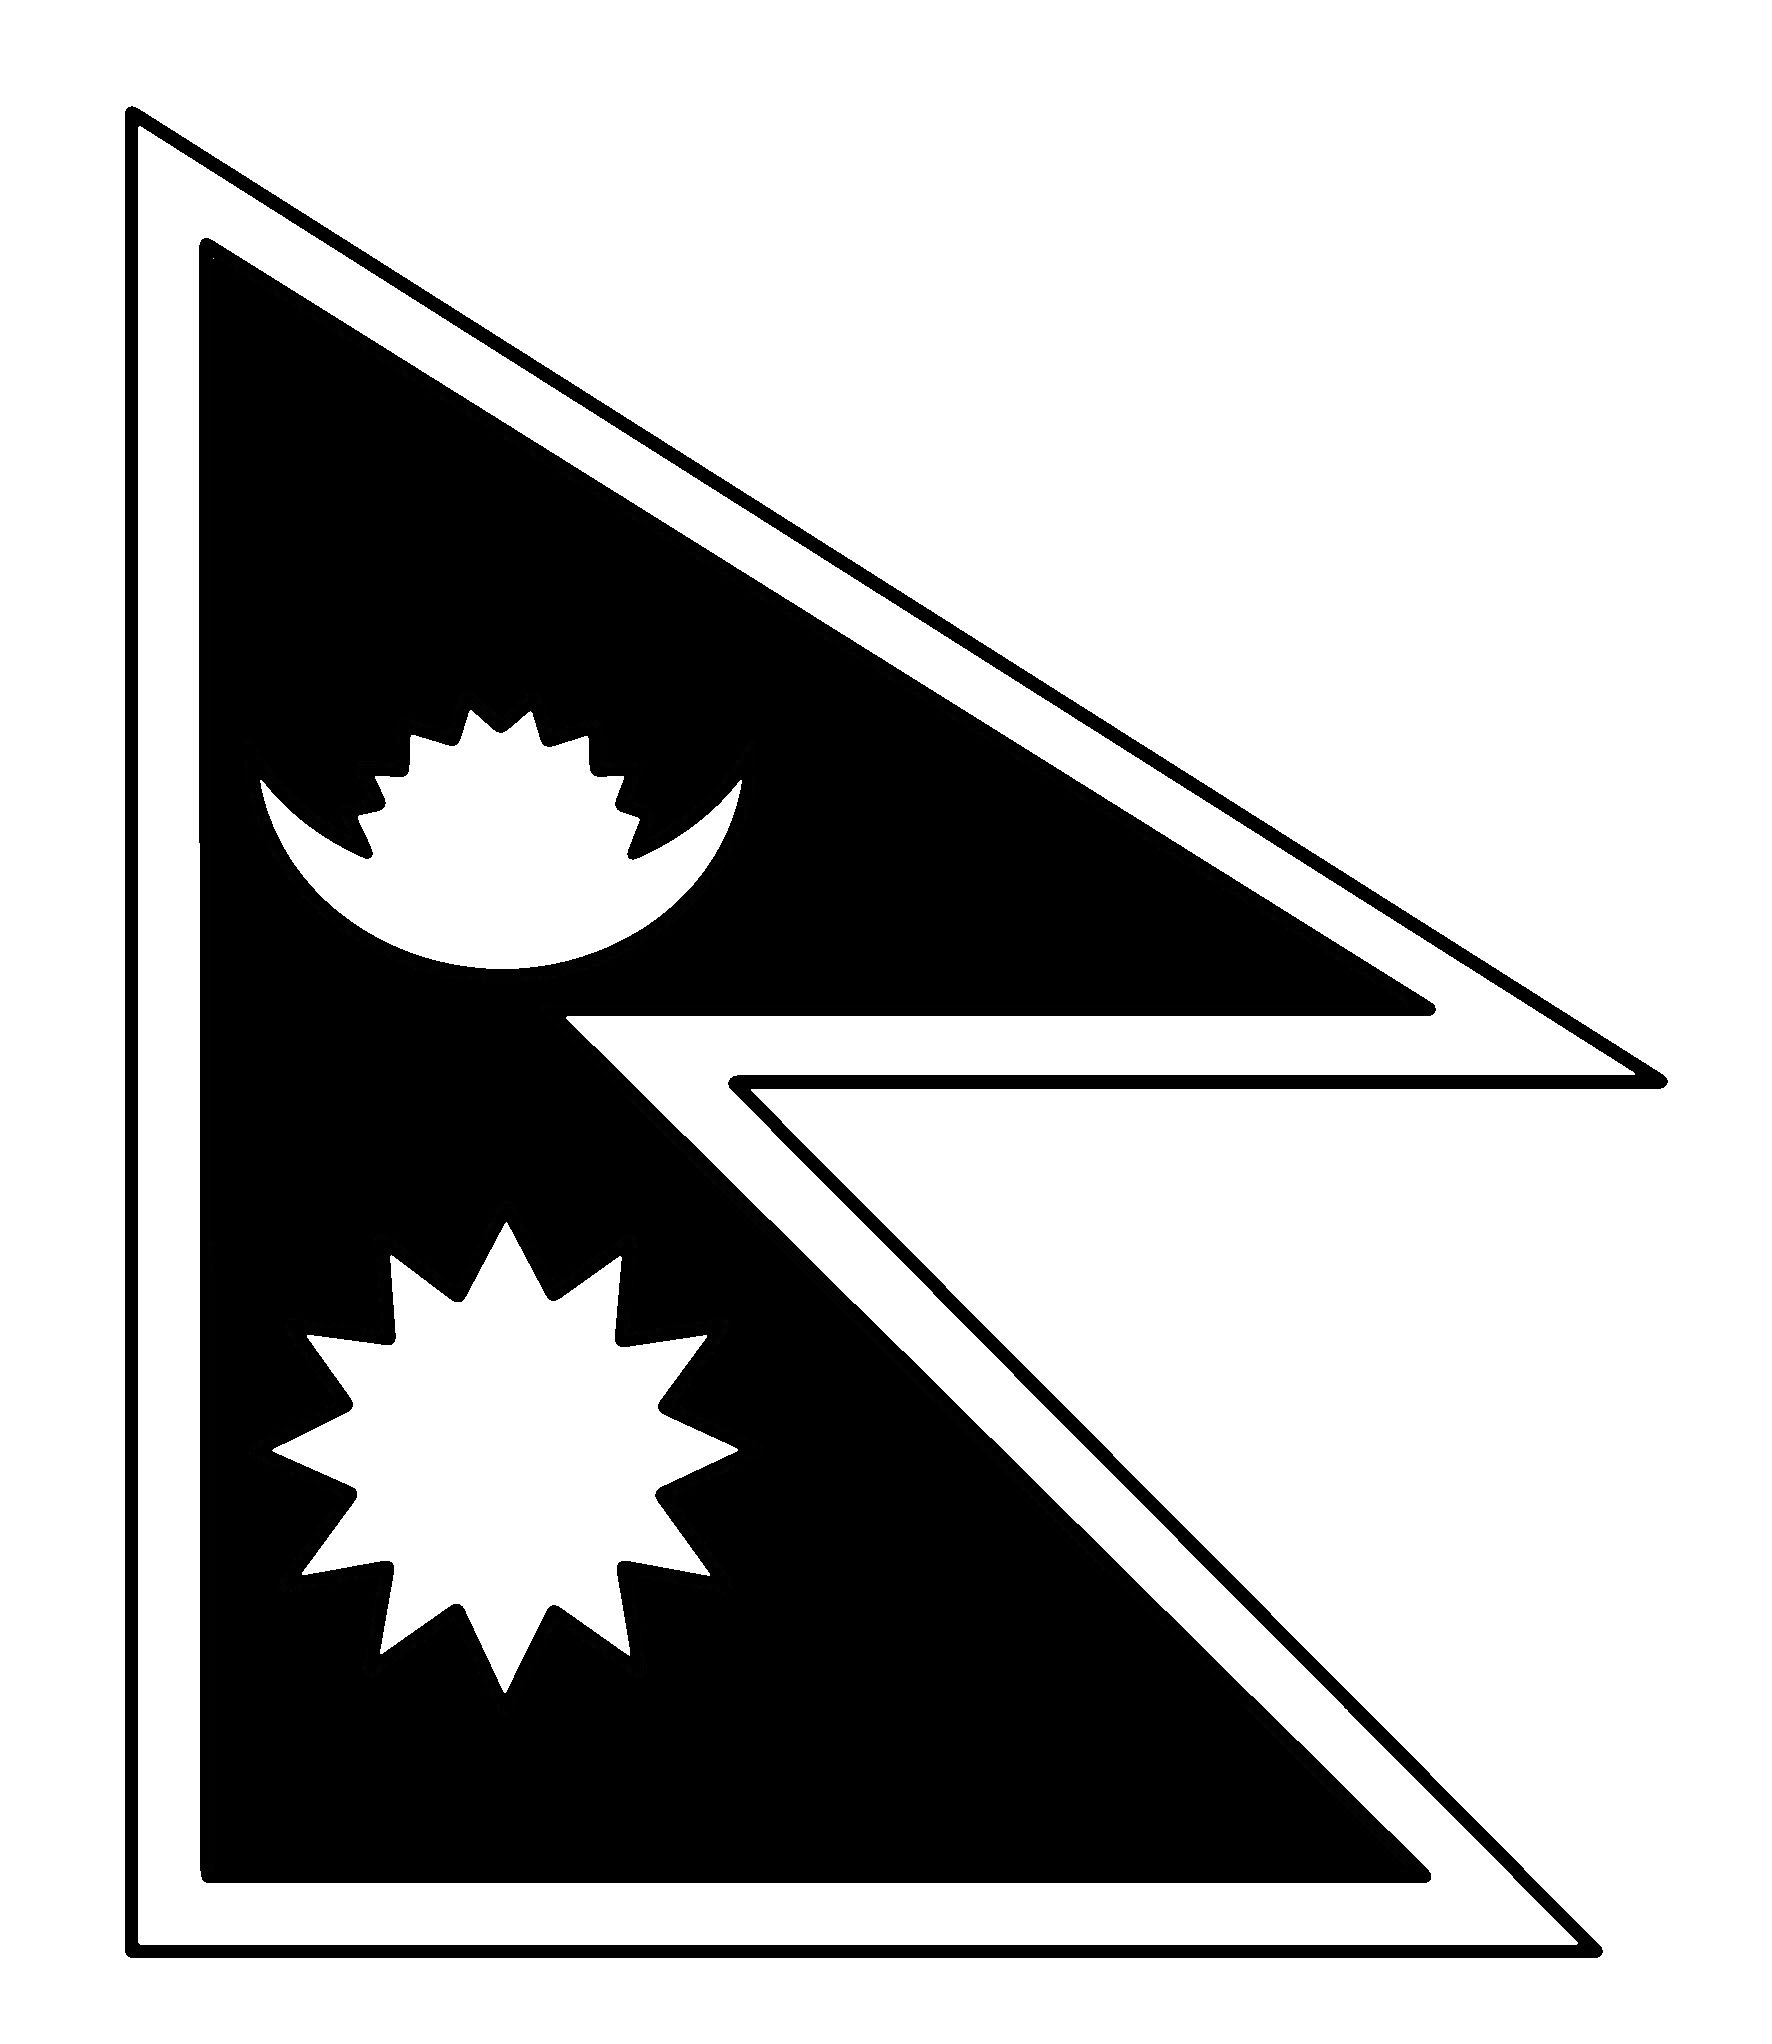 Black and white flag of Nepal